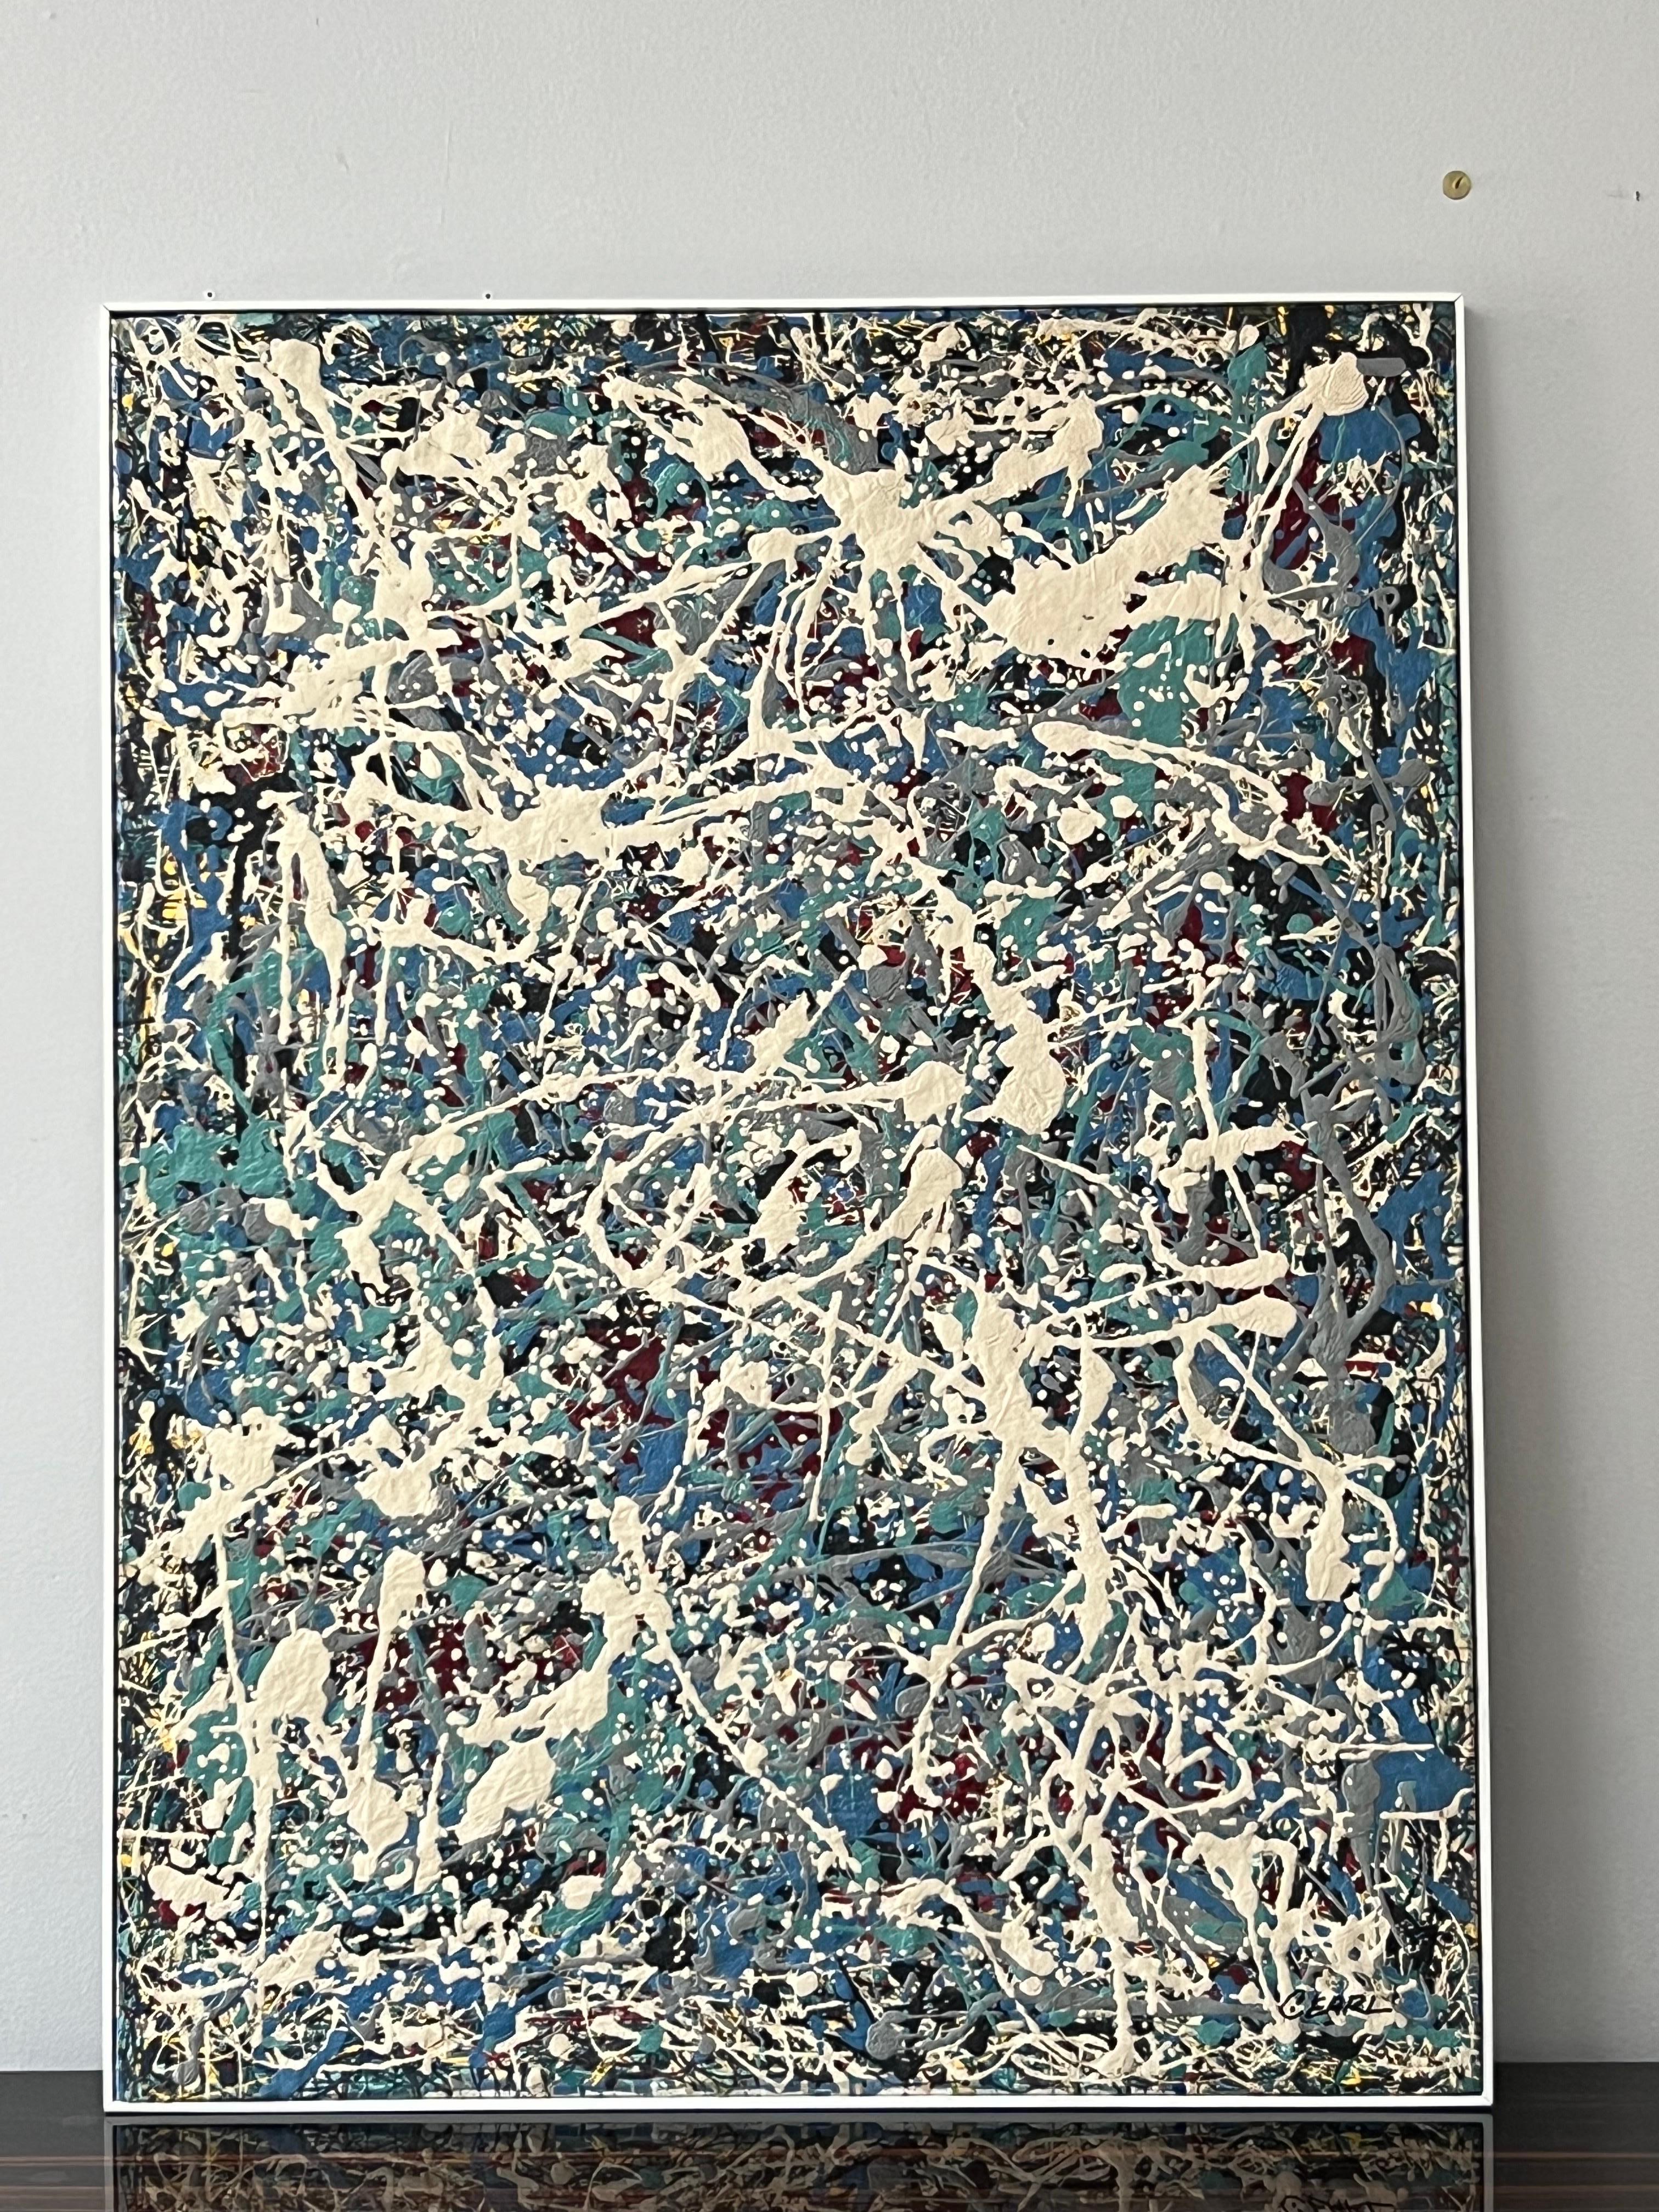 Abstract Expressionist Drip Oil Painting Manner of Jackson Pollock by C. Earl For Sale 2